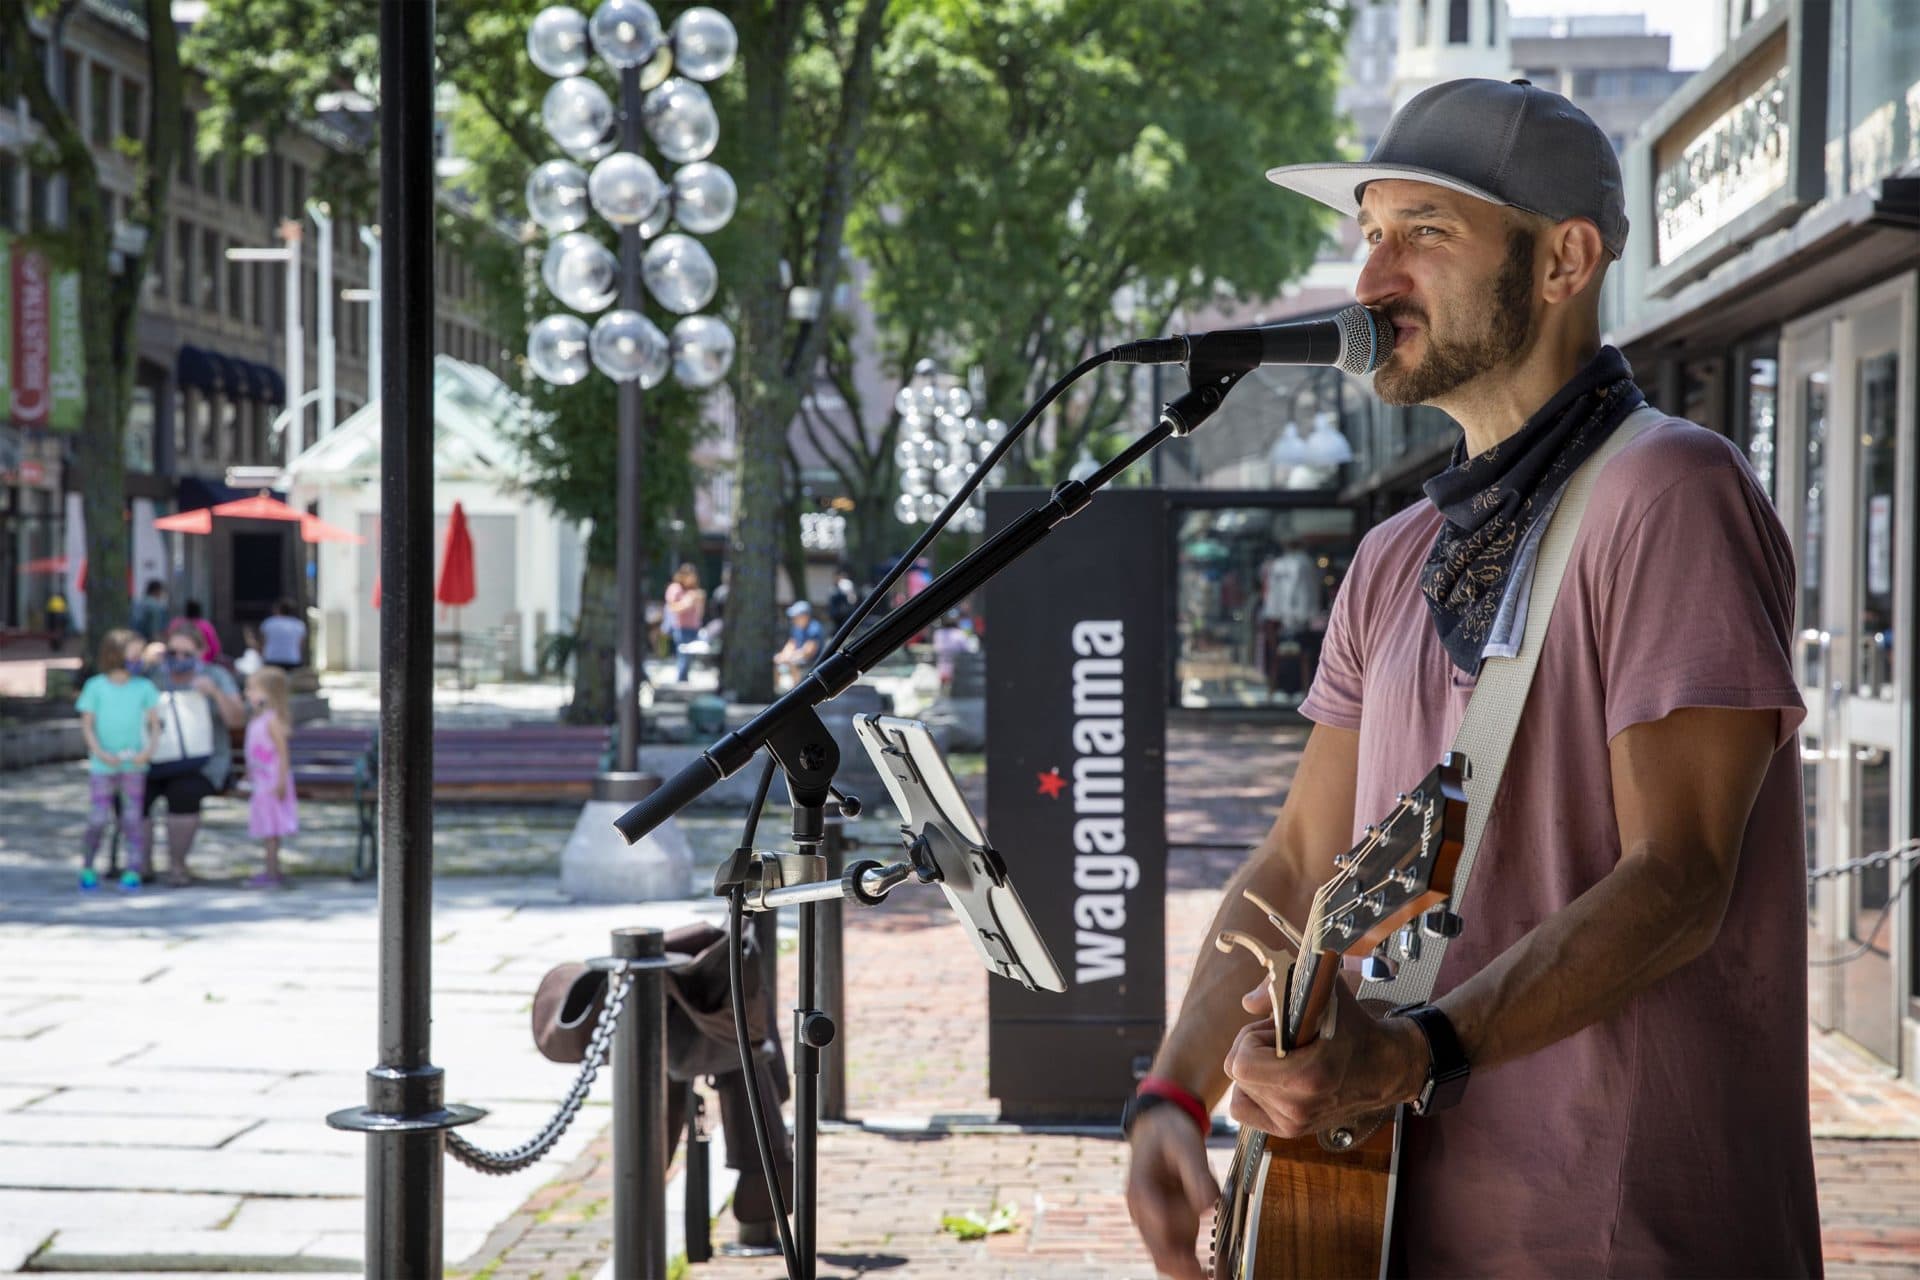 Guitarist and singer Ryan LaPerle plays for a small but appreciative audience as Faneuil Marketplace officially reopens. (Robin Lubbock/WBUR)